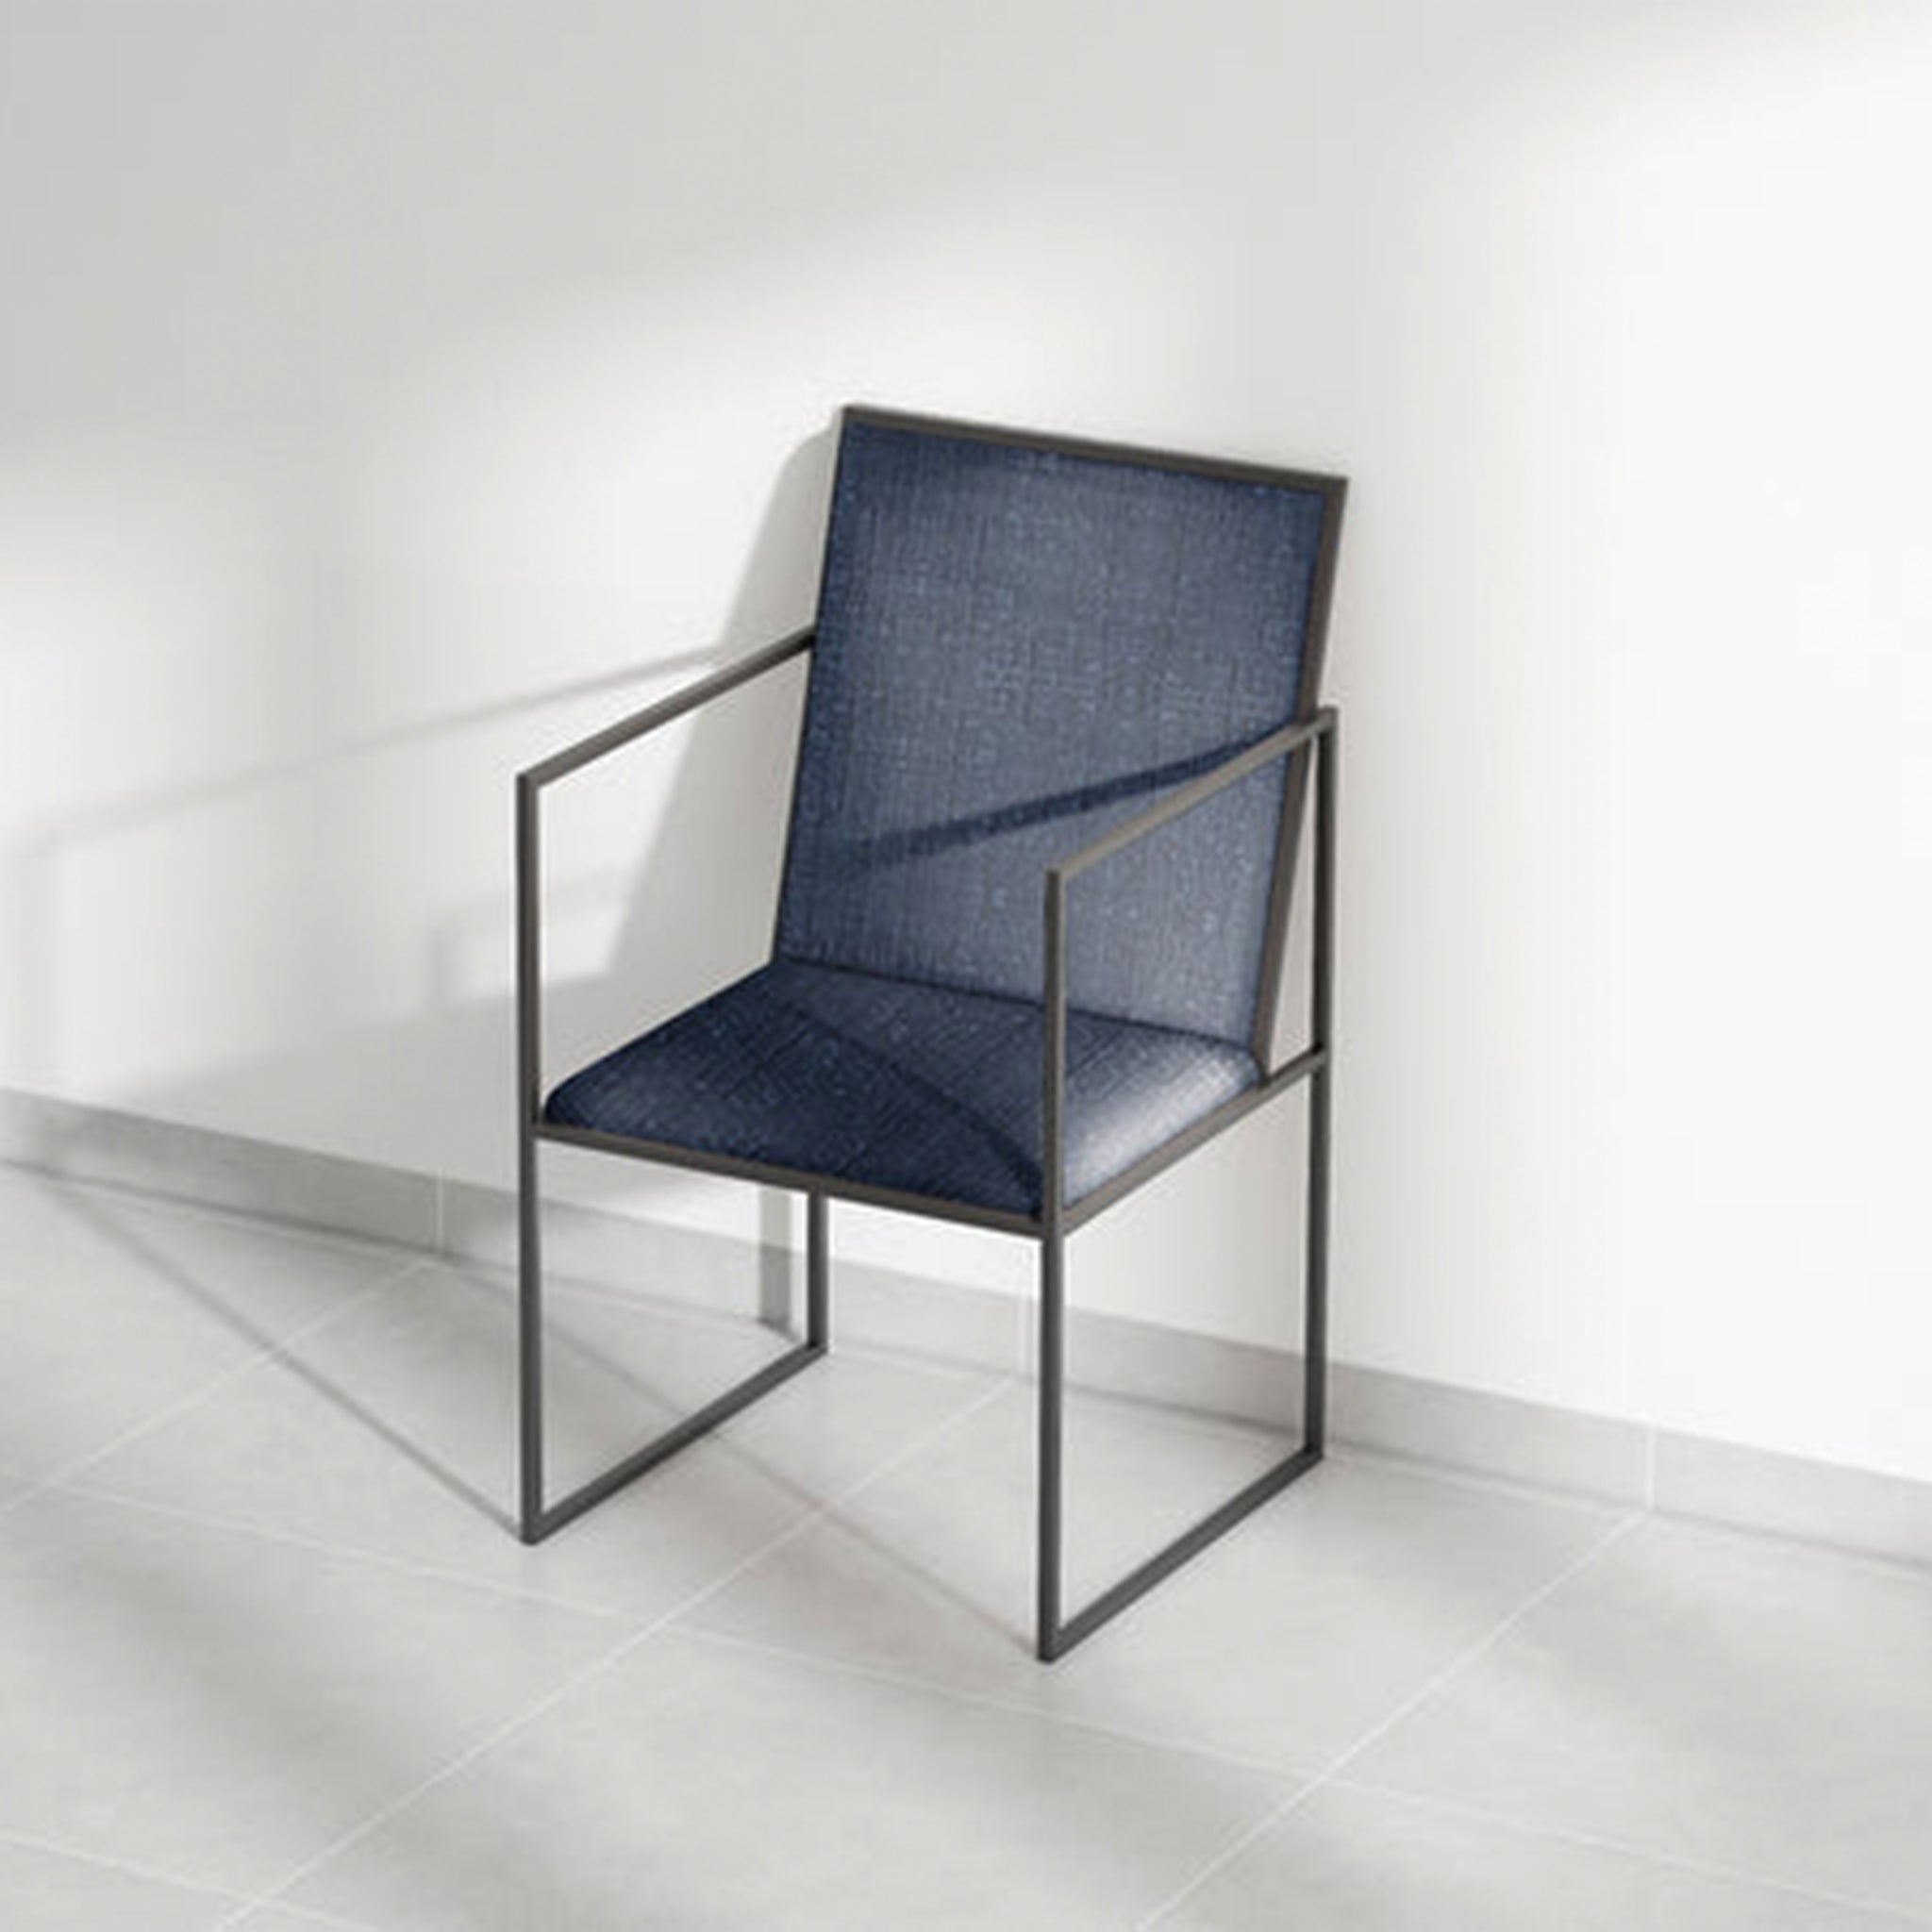 Designer dining chair with blue cushion and black metal frame